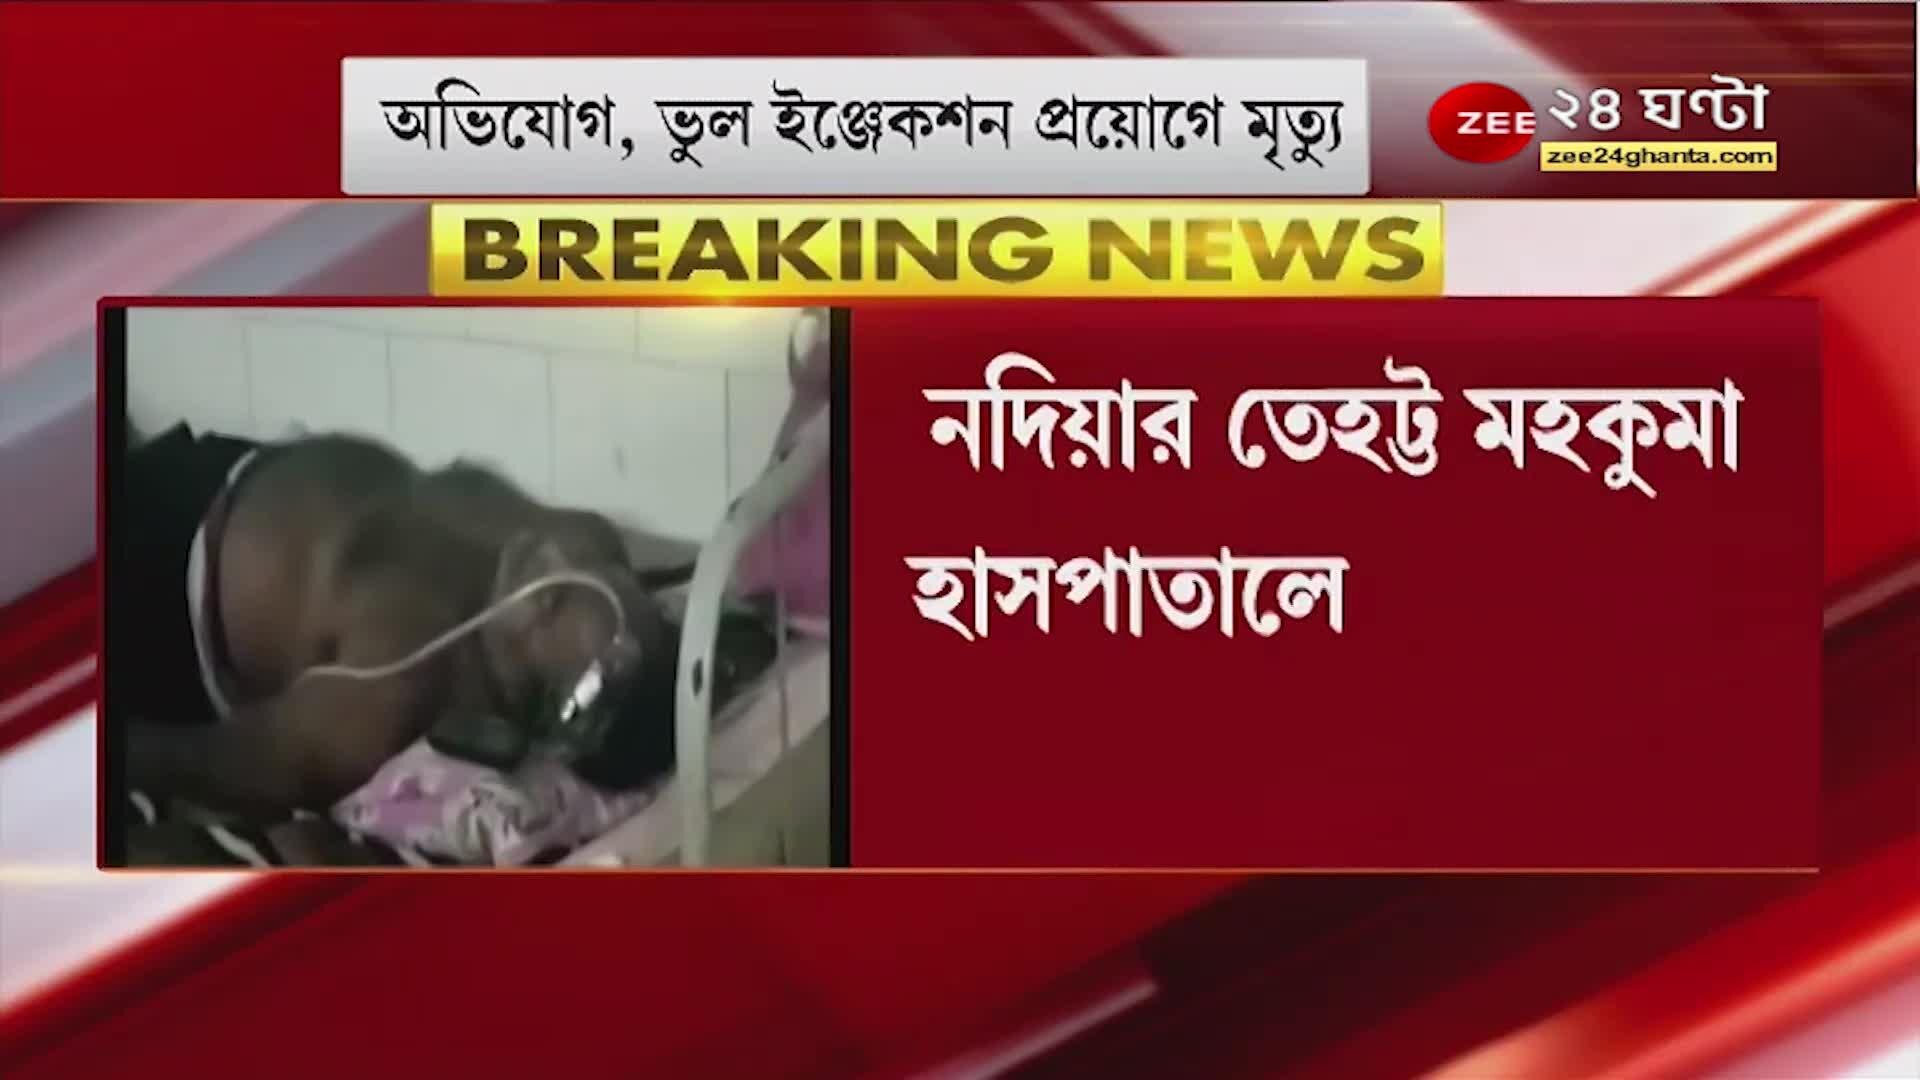 Nadia: wrong injection given to patient! Allegation of medical negligence in the death of a patient, incident at Tehatta Sub-Divisional Hospital